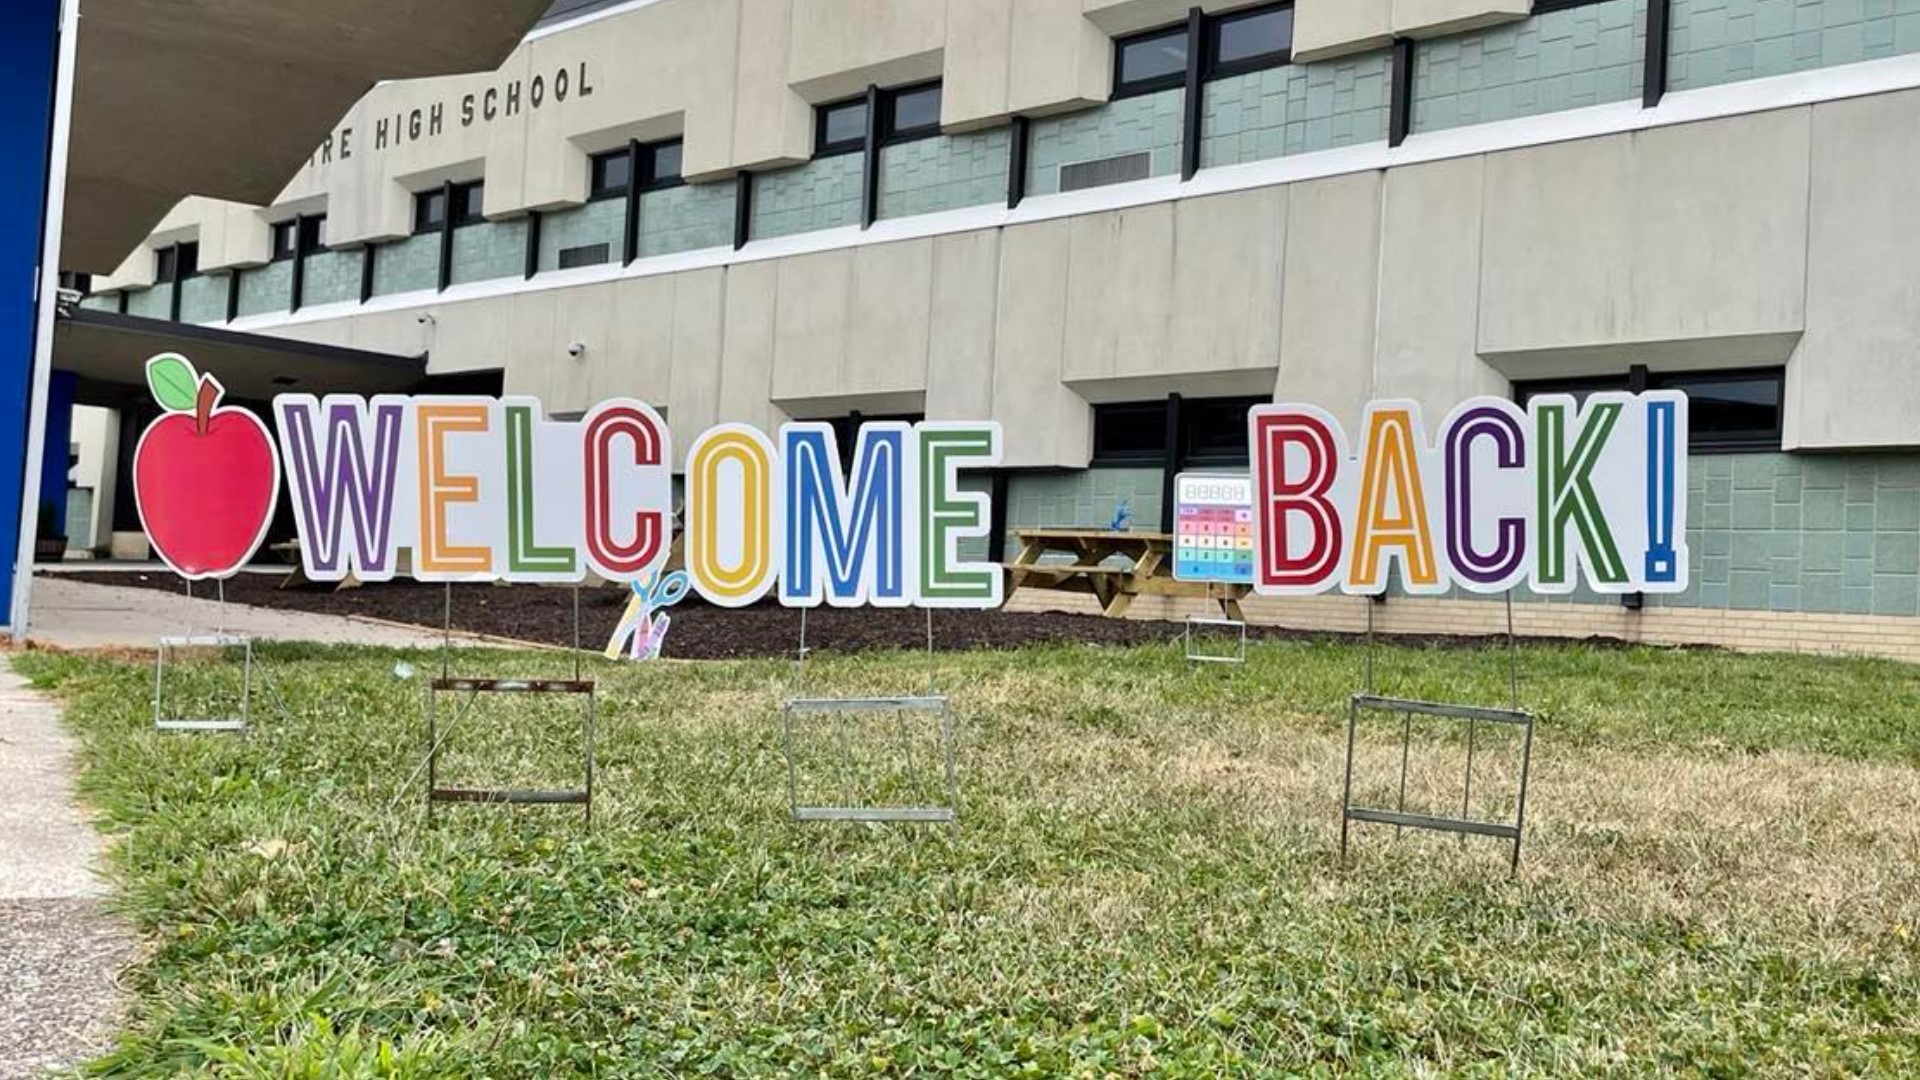 It’s official: summer break is over and school is back in session. Across Pennsylvania, students are beginning school fully in person for the first time since 2019.